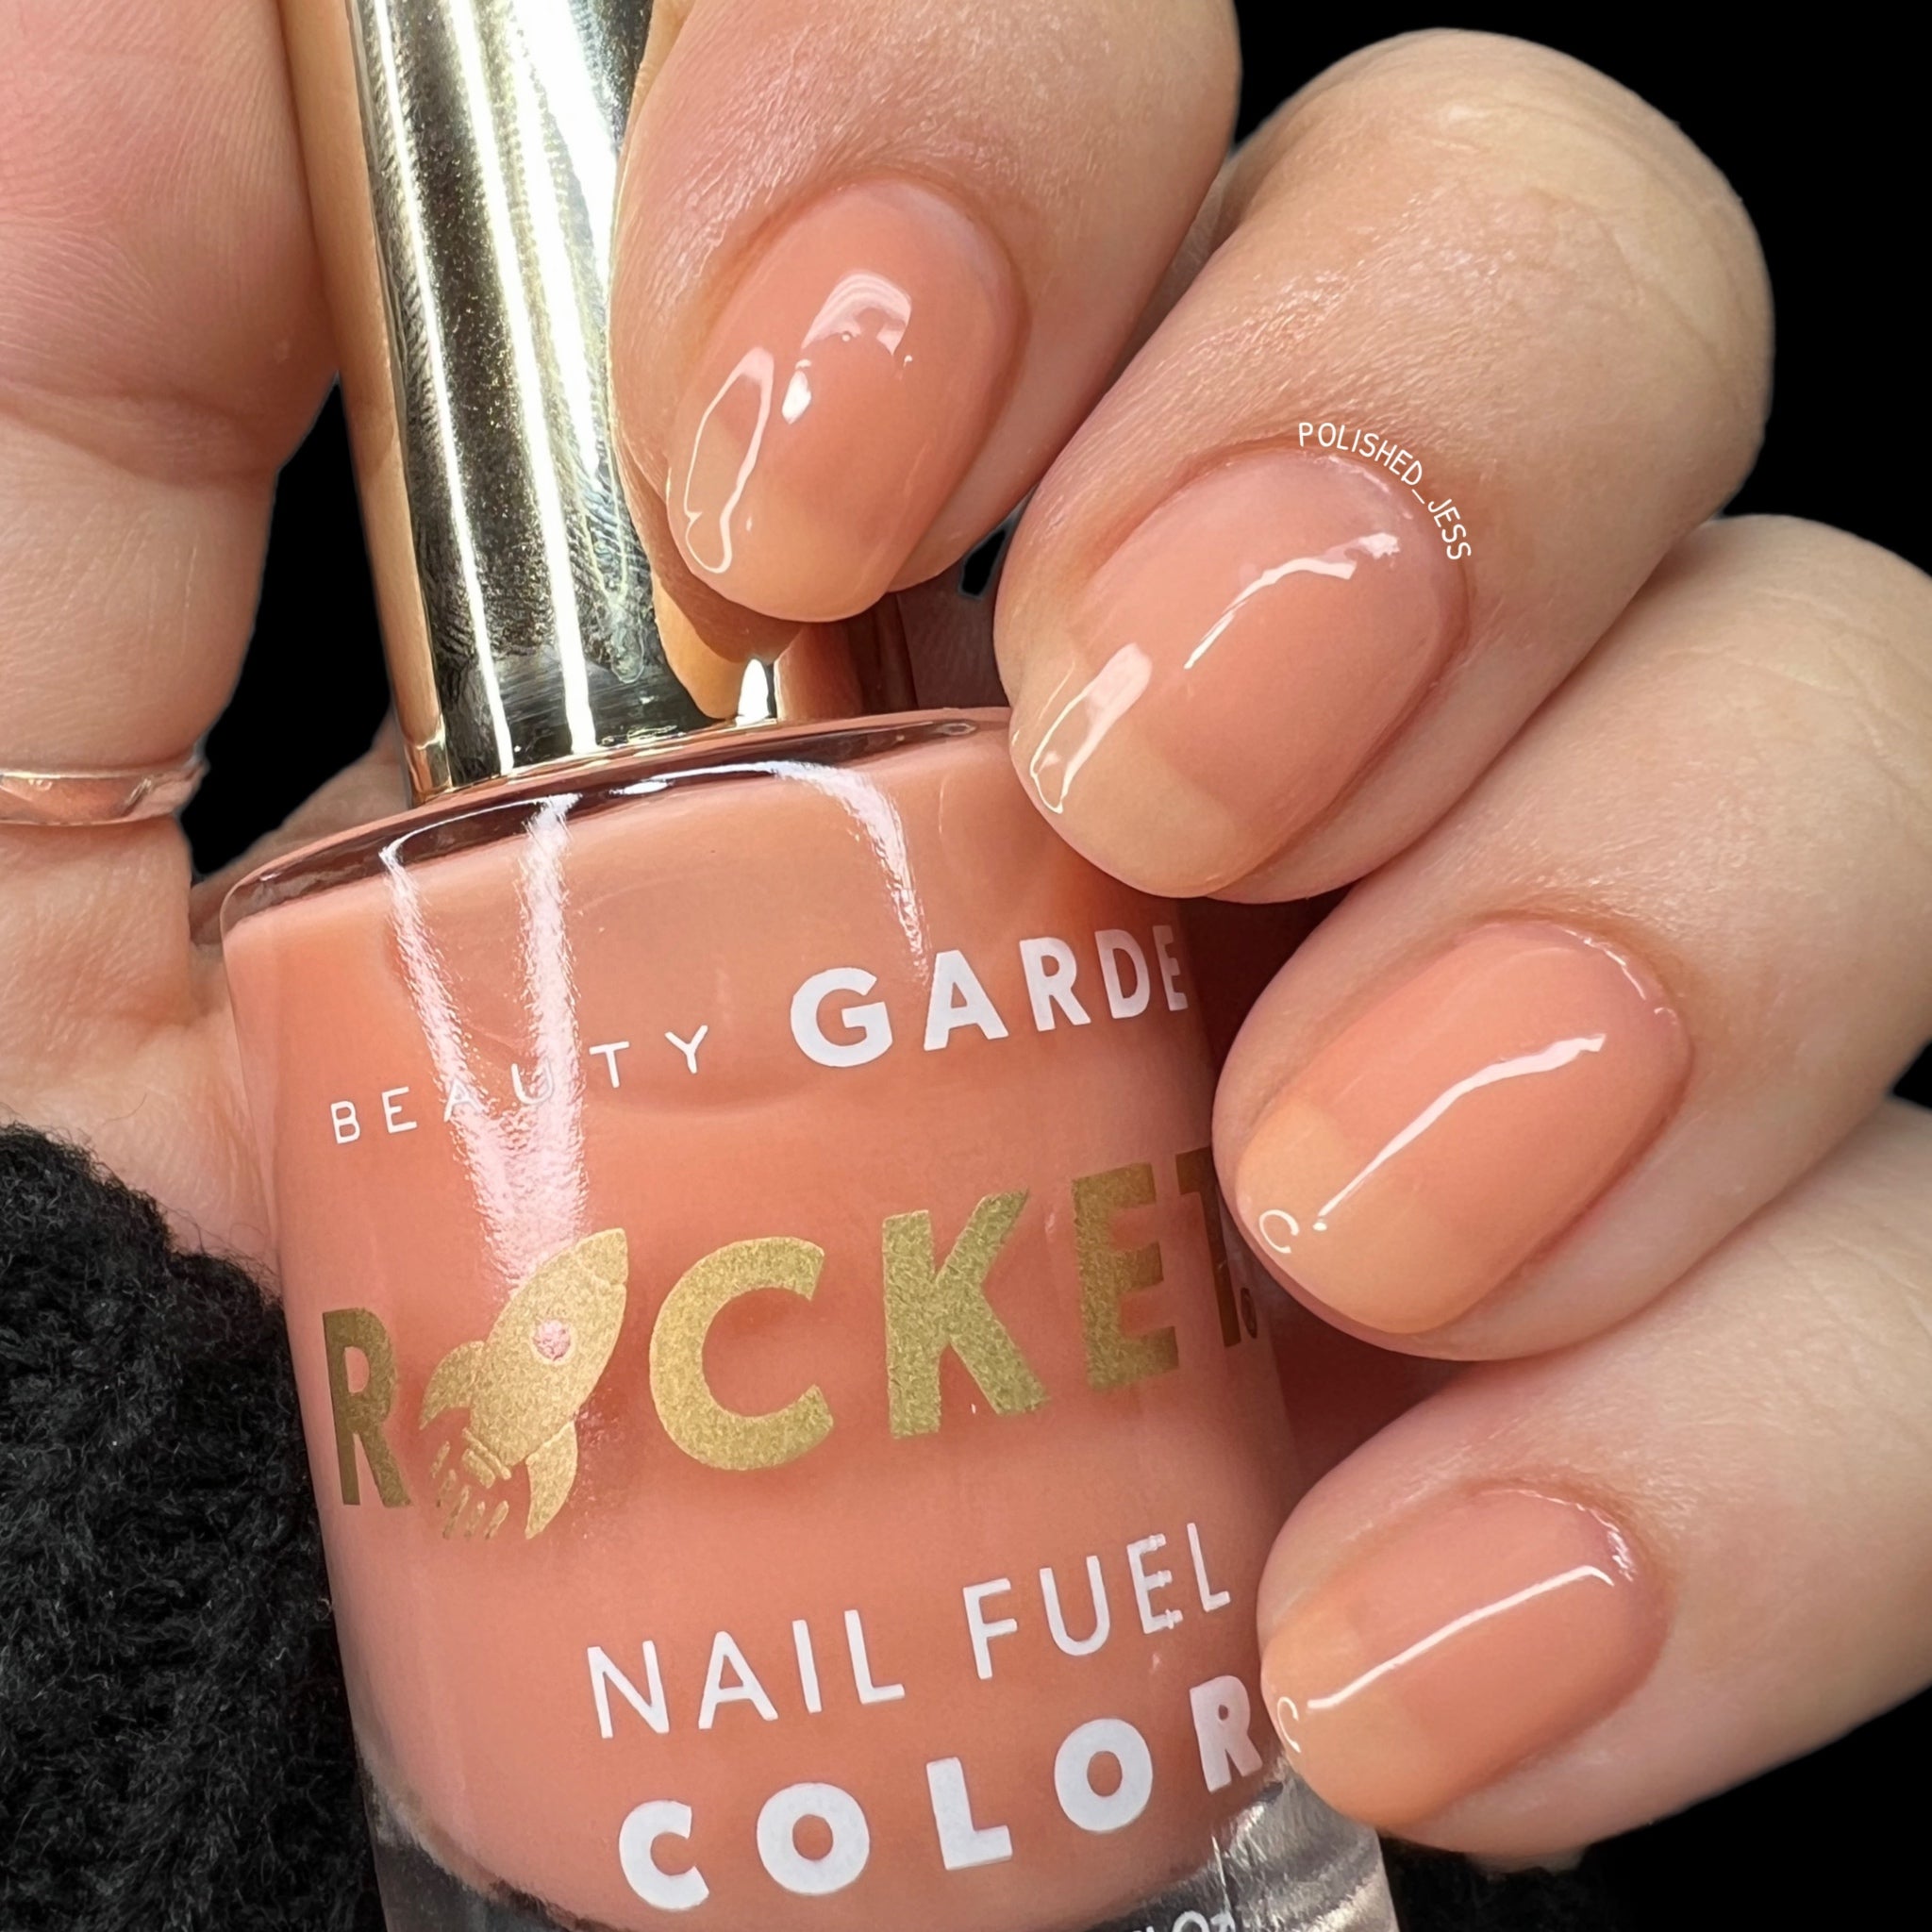 Rocket Nail Color - Barely There